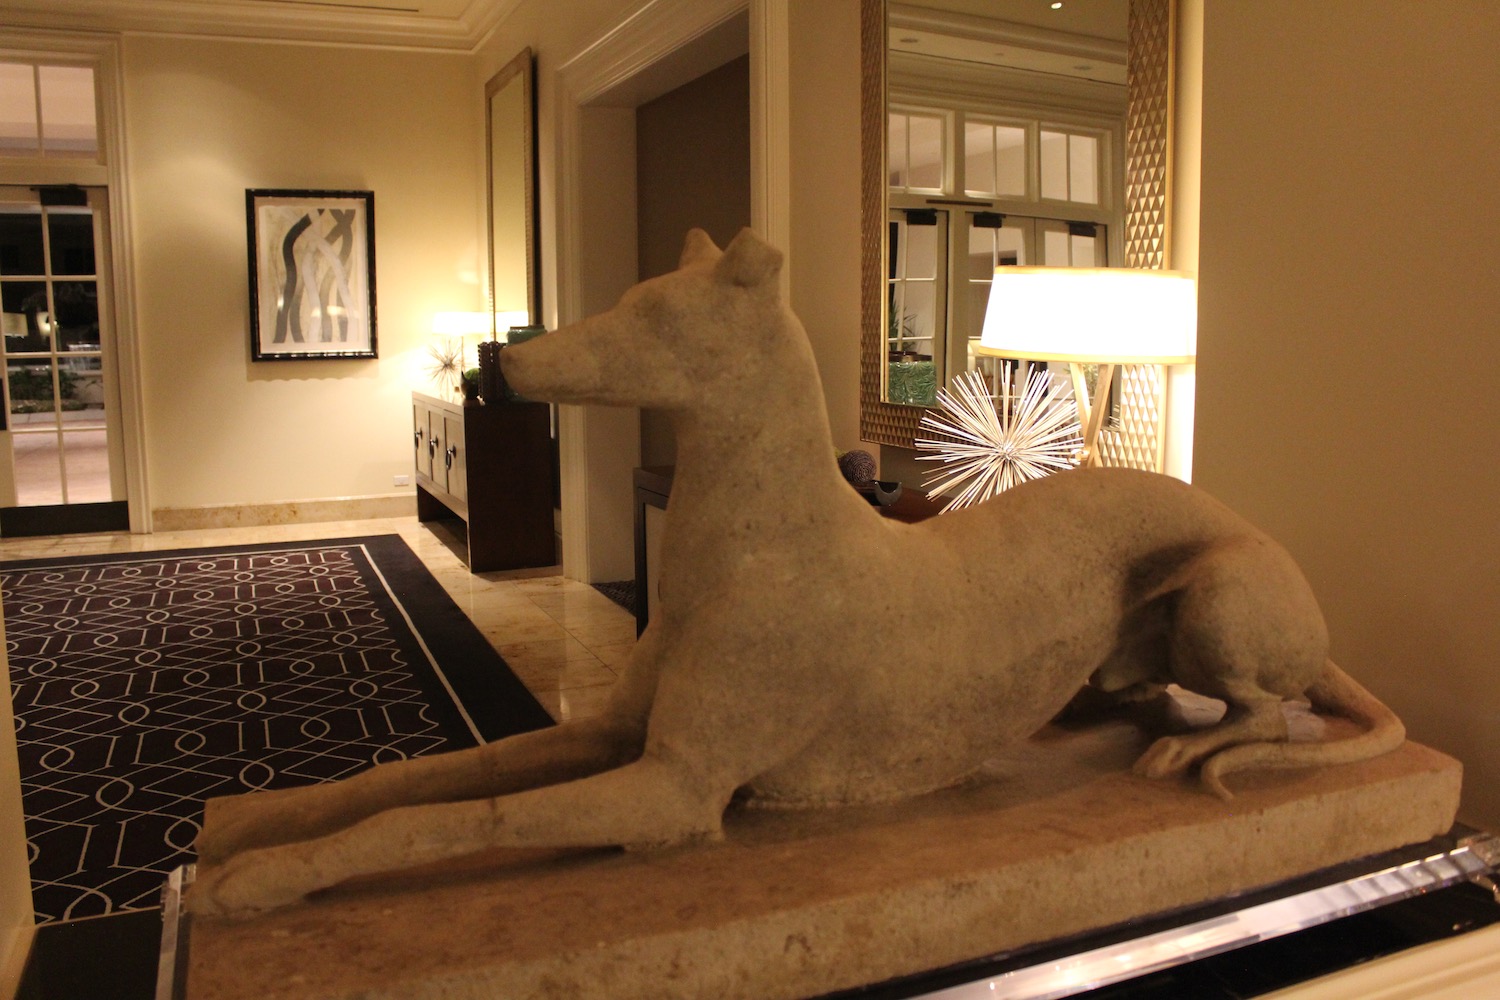 a statue of a dog in a room